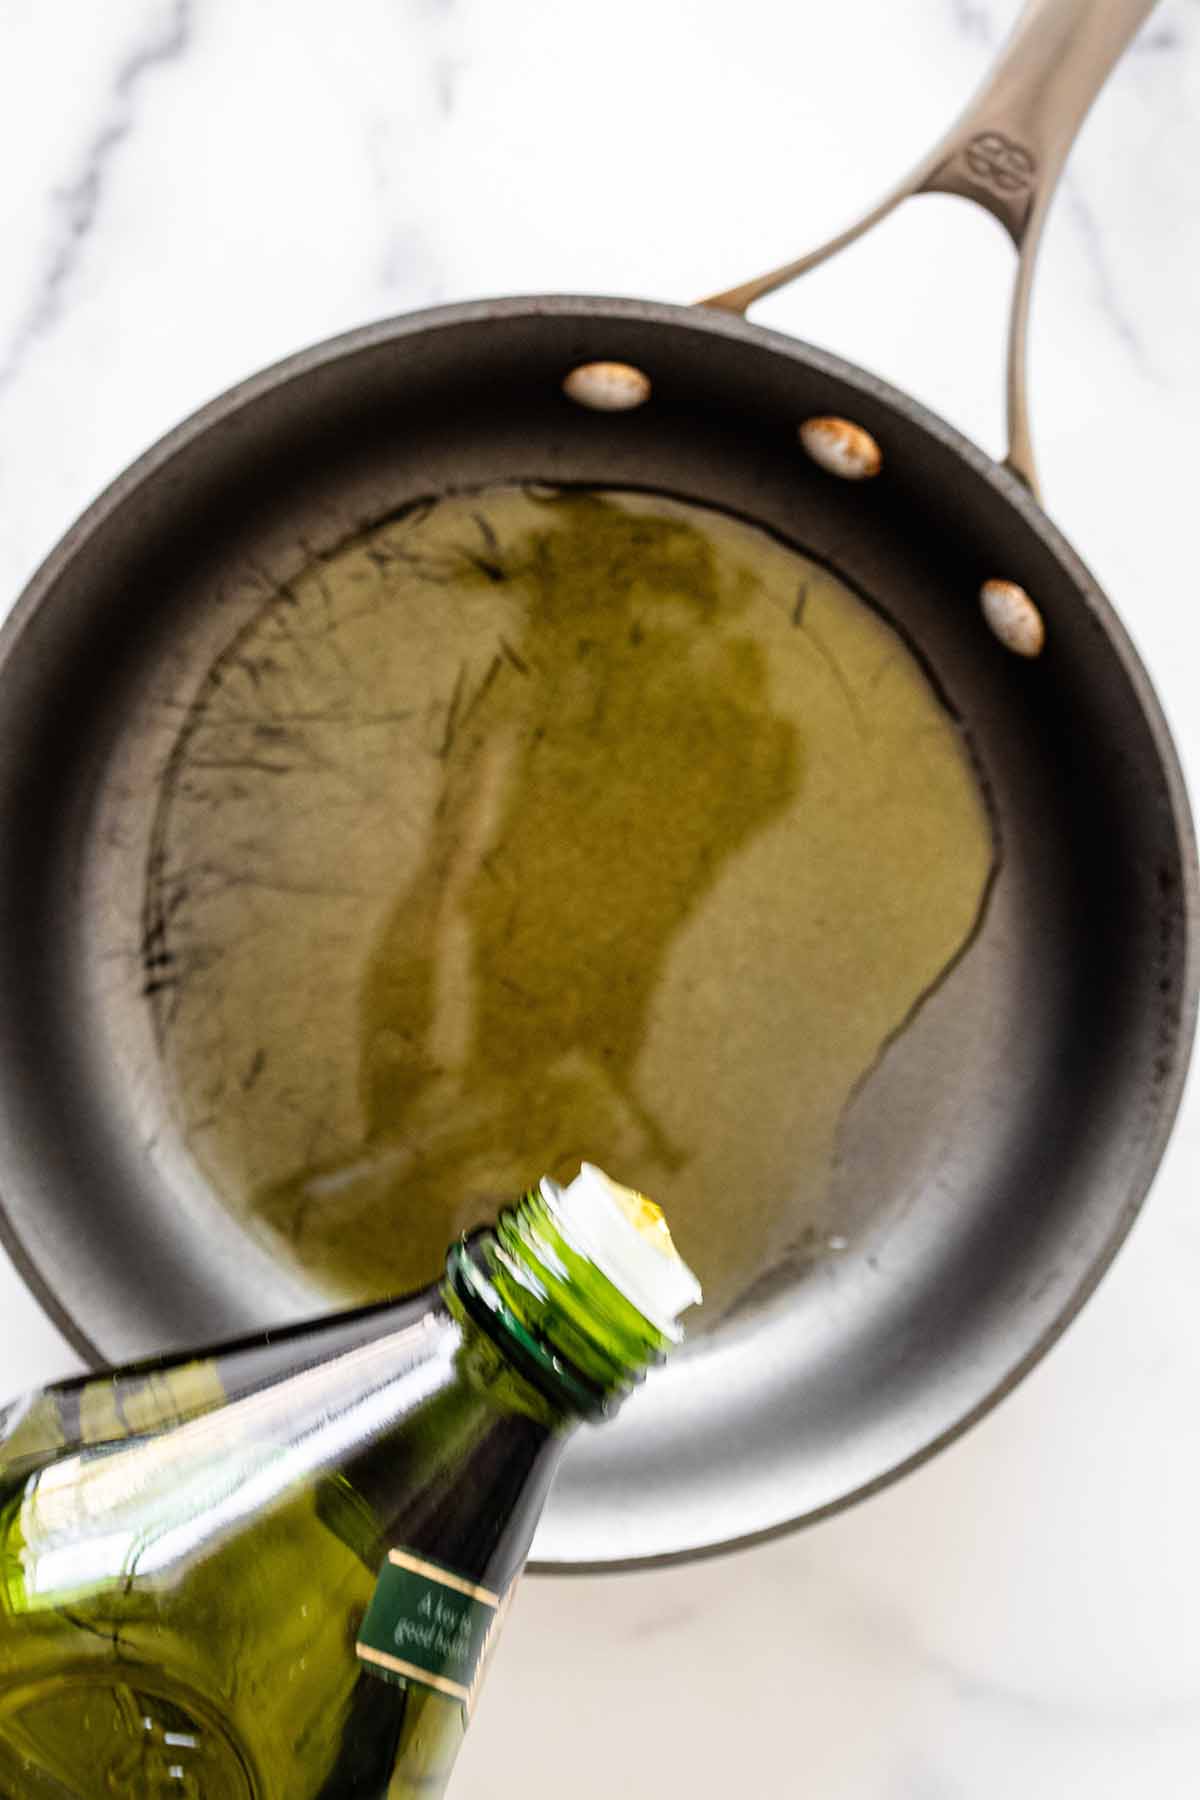 Overhead view of olive oil being poured into a skillet